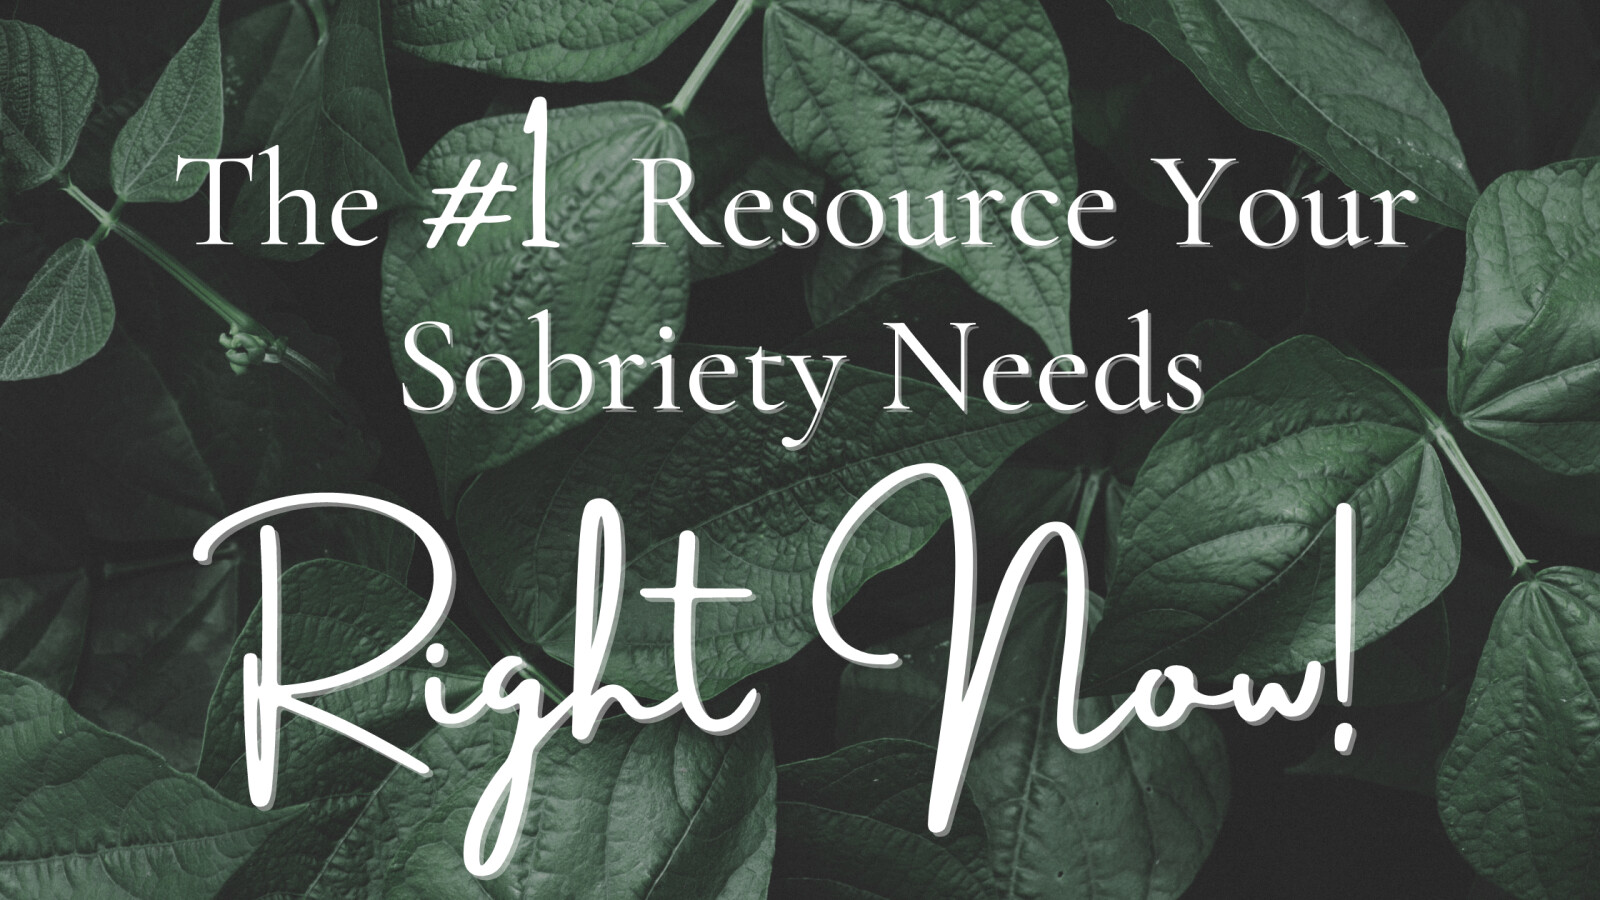 The #1 Resource Your Sobriety Needs Right Now!